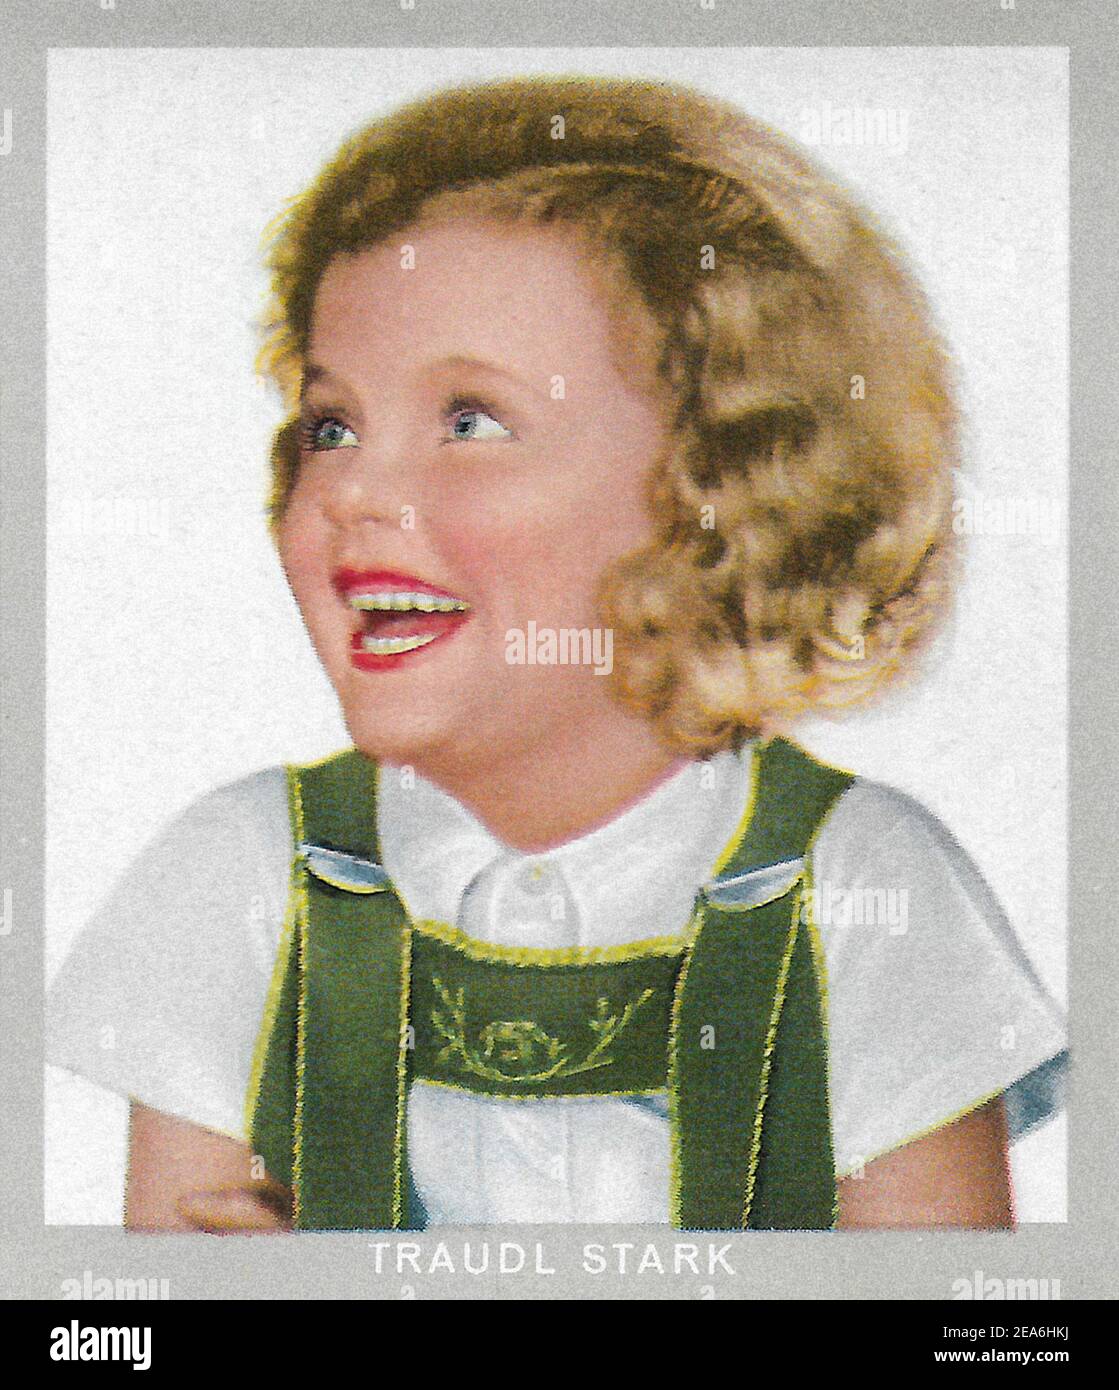 Vintage portrait of Traudl Stark. Traudl Stark (born March 17, 1930 in Vienna) was a child actor in German movies. Between 1945 and 1947 she also acte Stock Photo